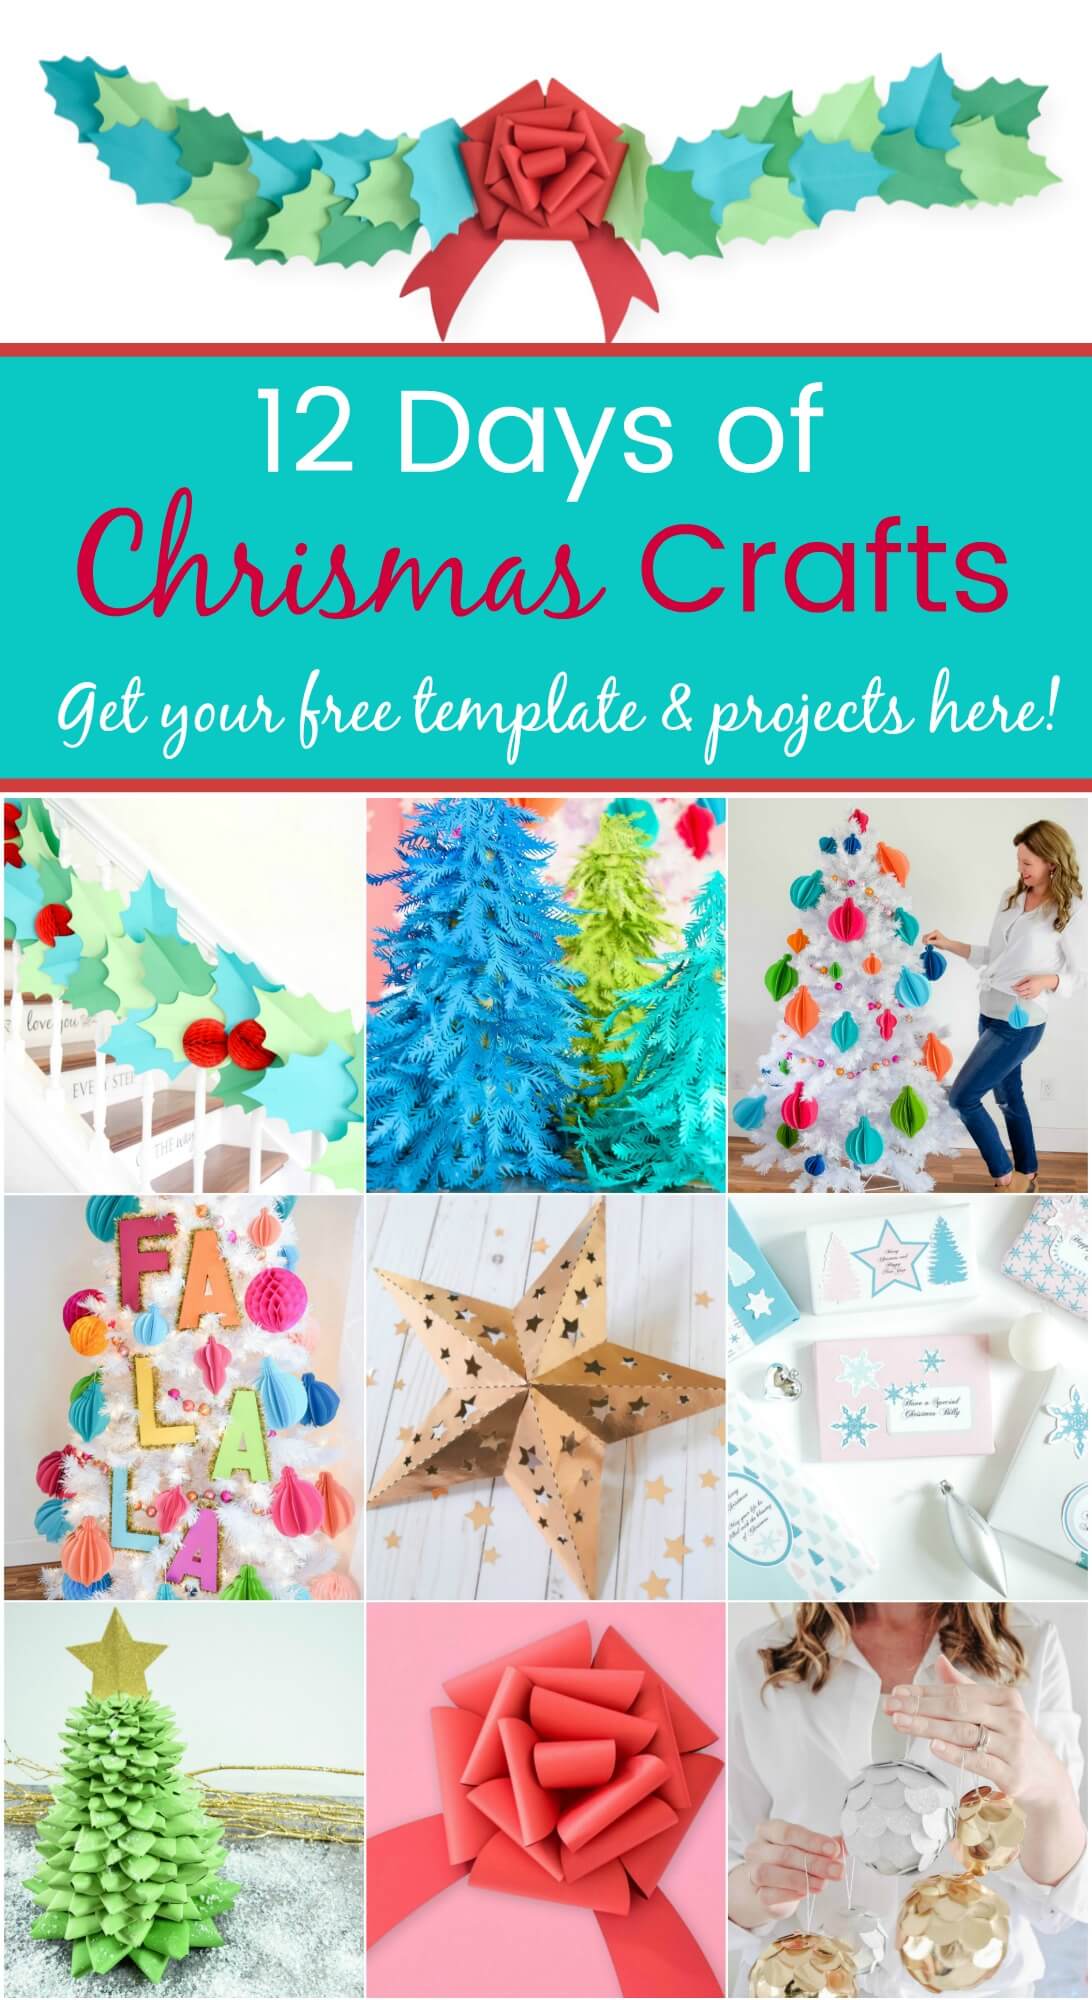 A collage of images show many colorful Christmas crafts, from garland to decorative paper Christmas trees, bows, cards, and more. Text across the top of the image reads, "12 Days of Christmas Crafts"